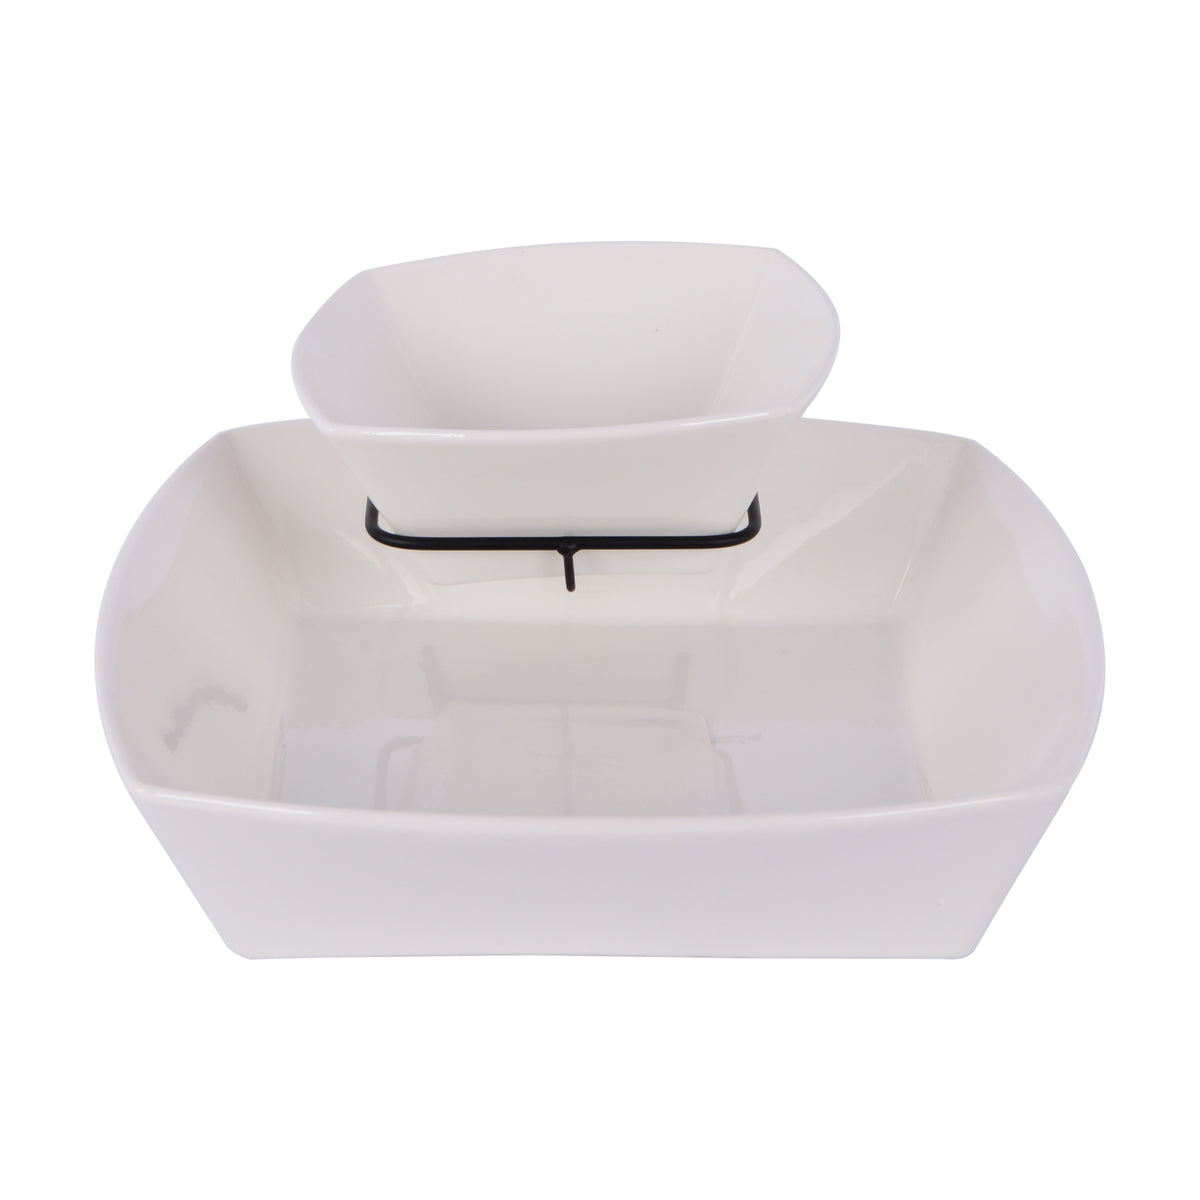 2 Pcs Square Bowl with stand, White